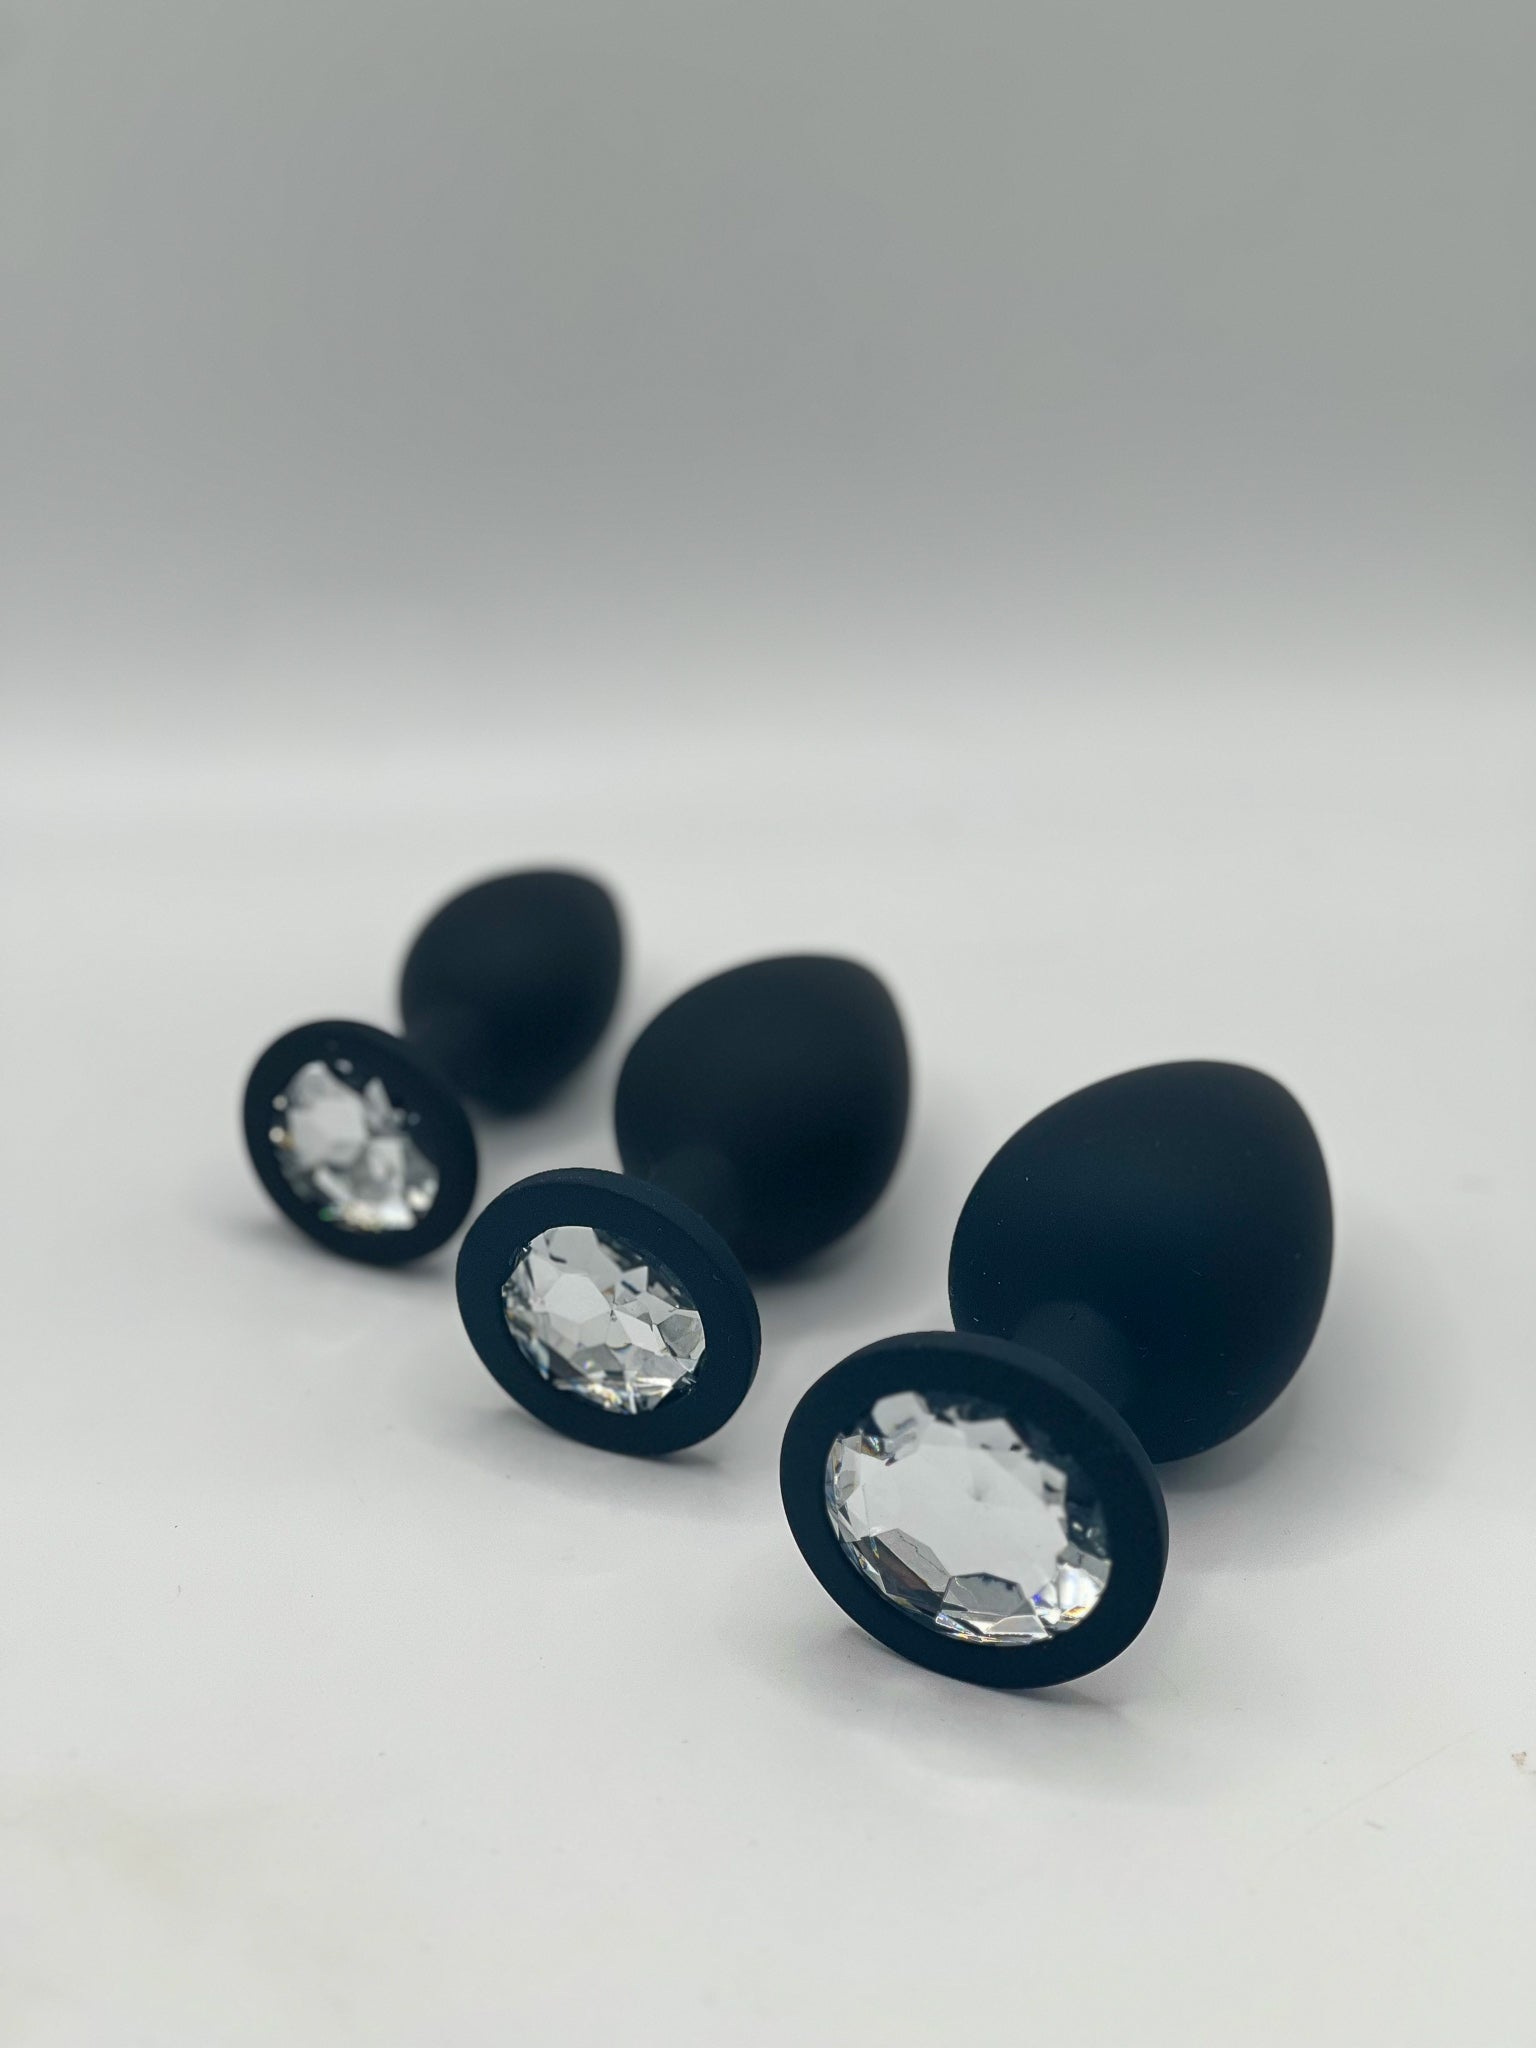 Introducing our set of 3 silicone butt plugs, designed to take your anal play to the next level. Made with high-quality, body-safe silicone, these butt plugs are soft, smooth, and easy to clean. the butt plugs come in 3 different sizes. Product specifics - Small plug - 7cm length // 9cm diameter Medium plug 8cm length // 11cm diameter Large Plug 9cm length // 13cm diameter Material Medical grade flexible silicone.